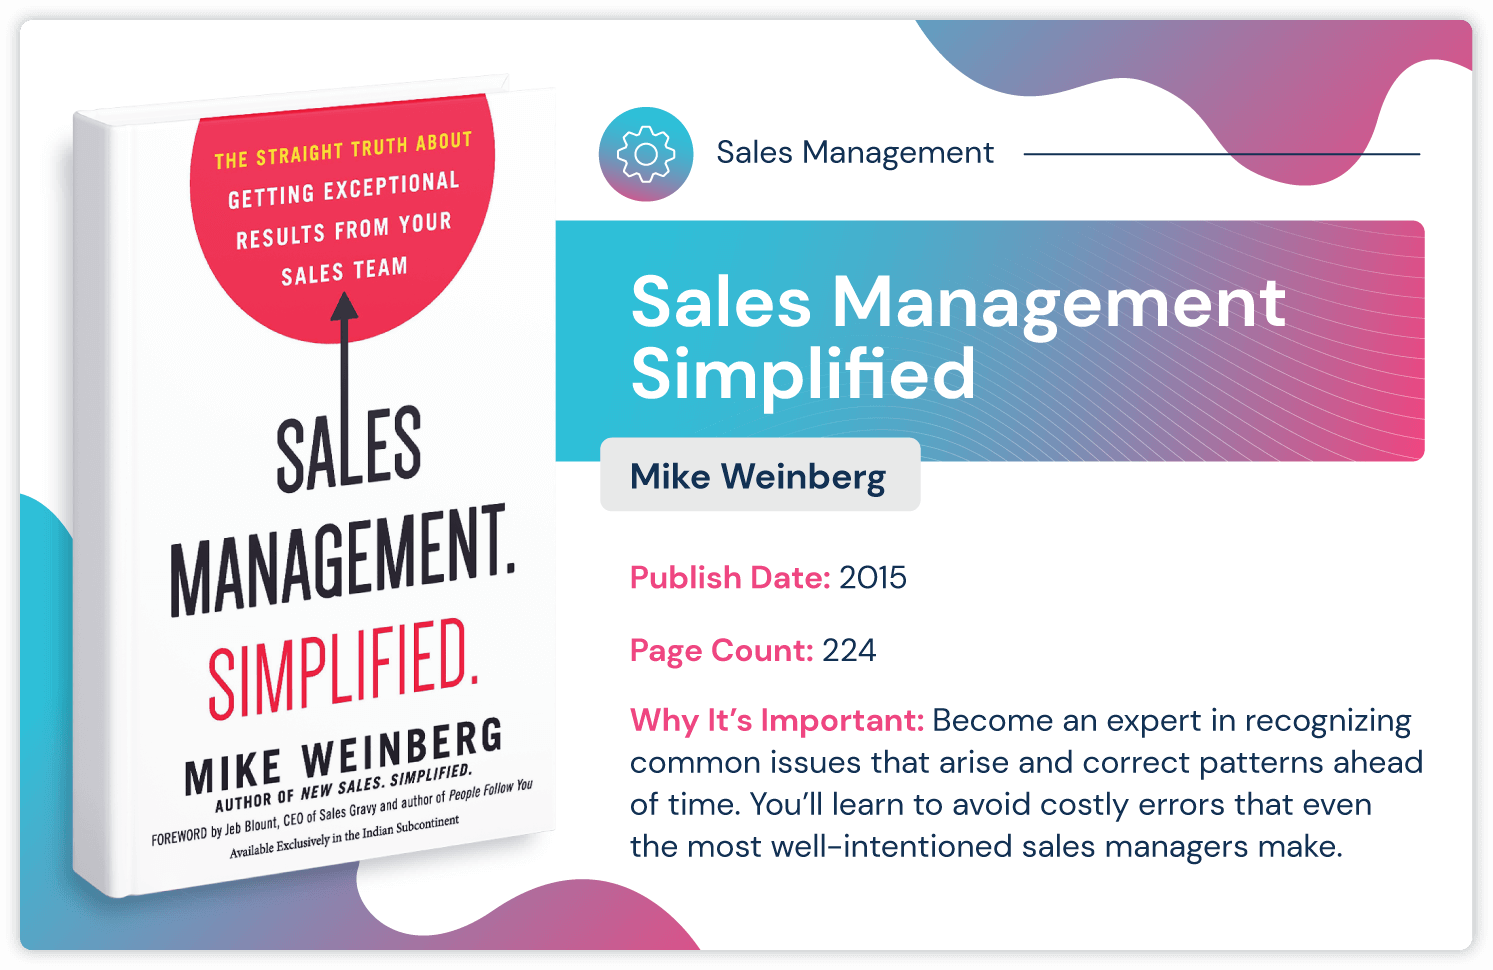 Sales management book called "Sales Management Simplified by Mike Weinberg about avoiding costly sales management errors. Published in 2015 and 224 pages long